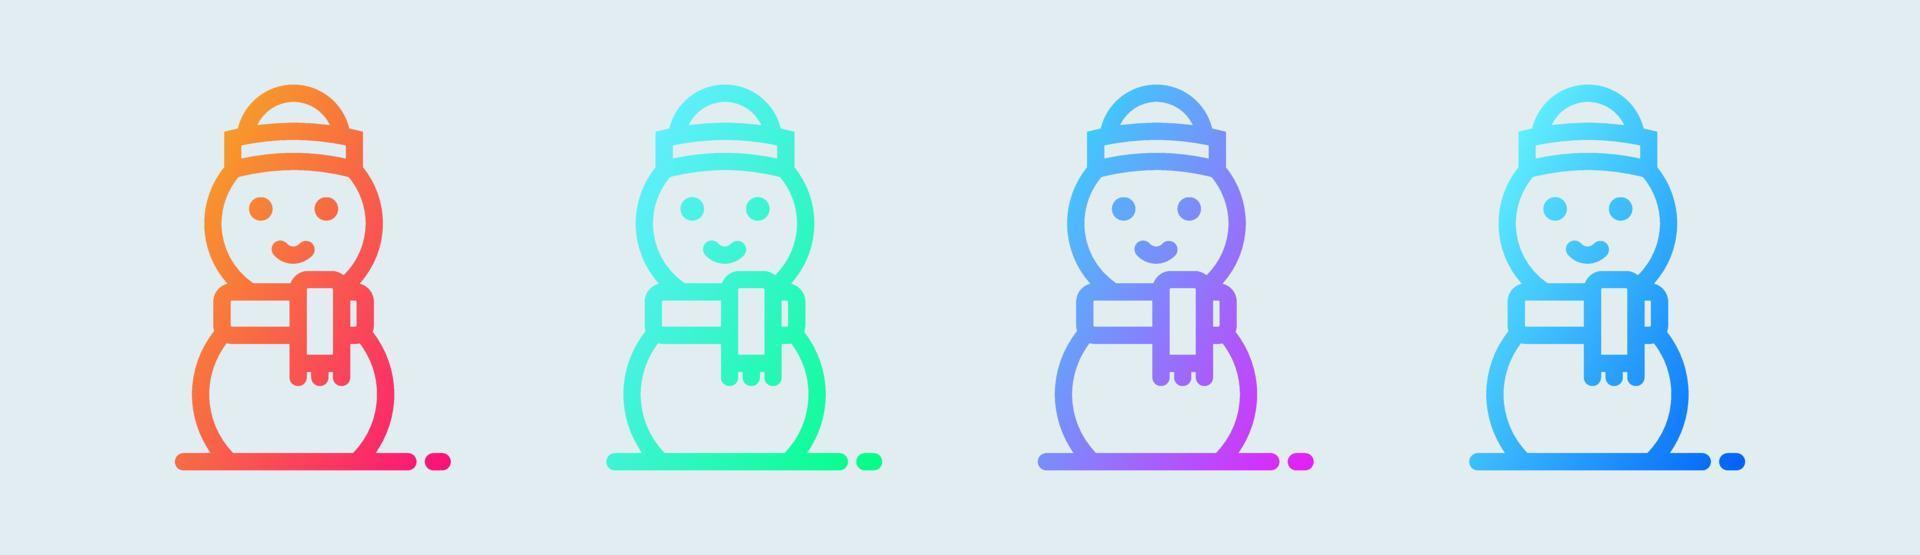 Snowman line icon in gradient colors. Winter holiday signs vector illustration.